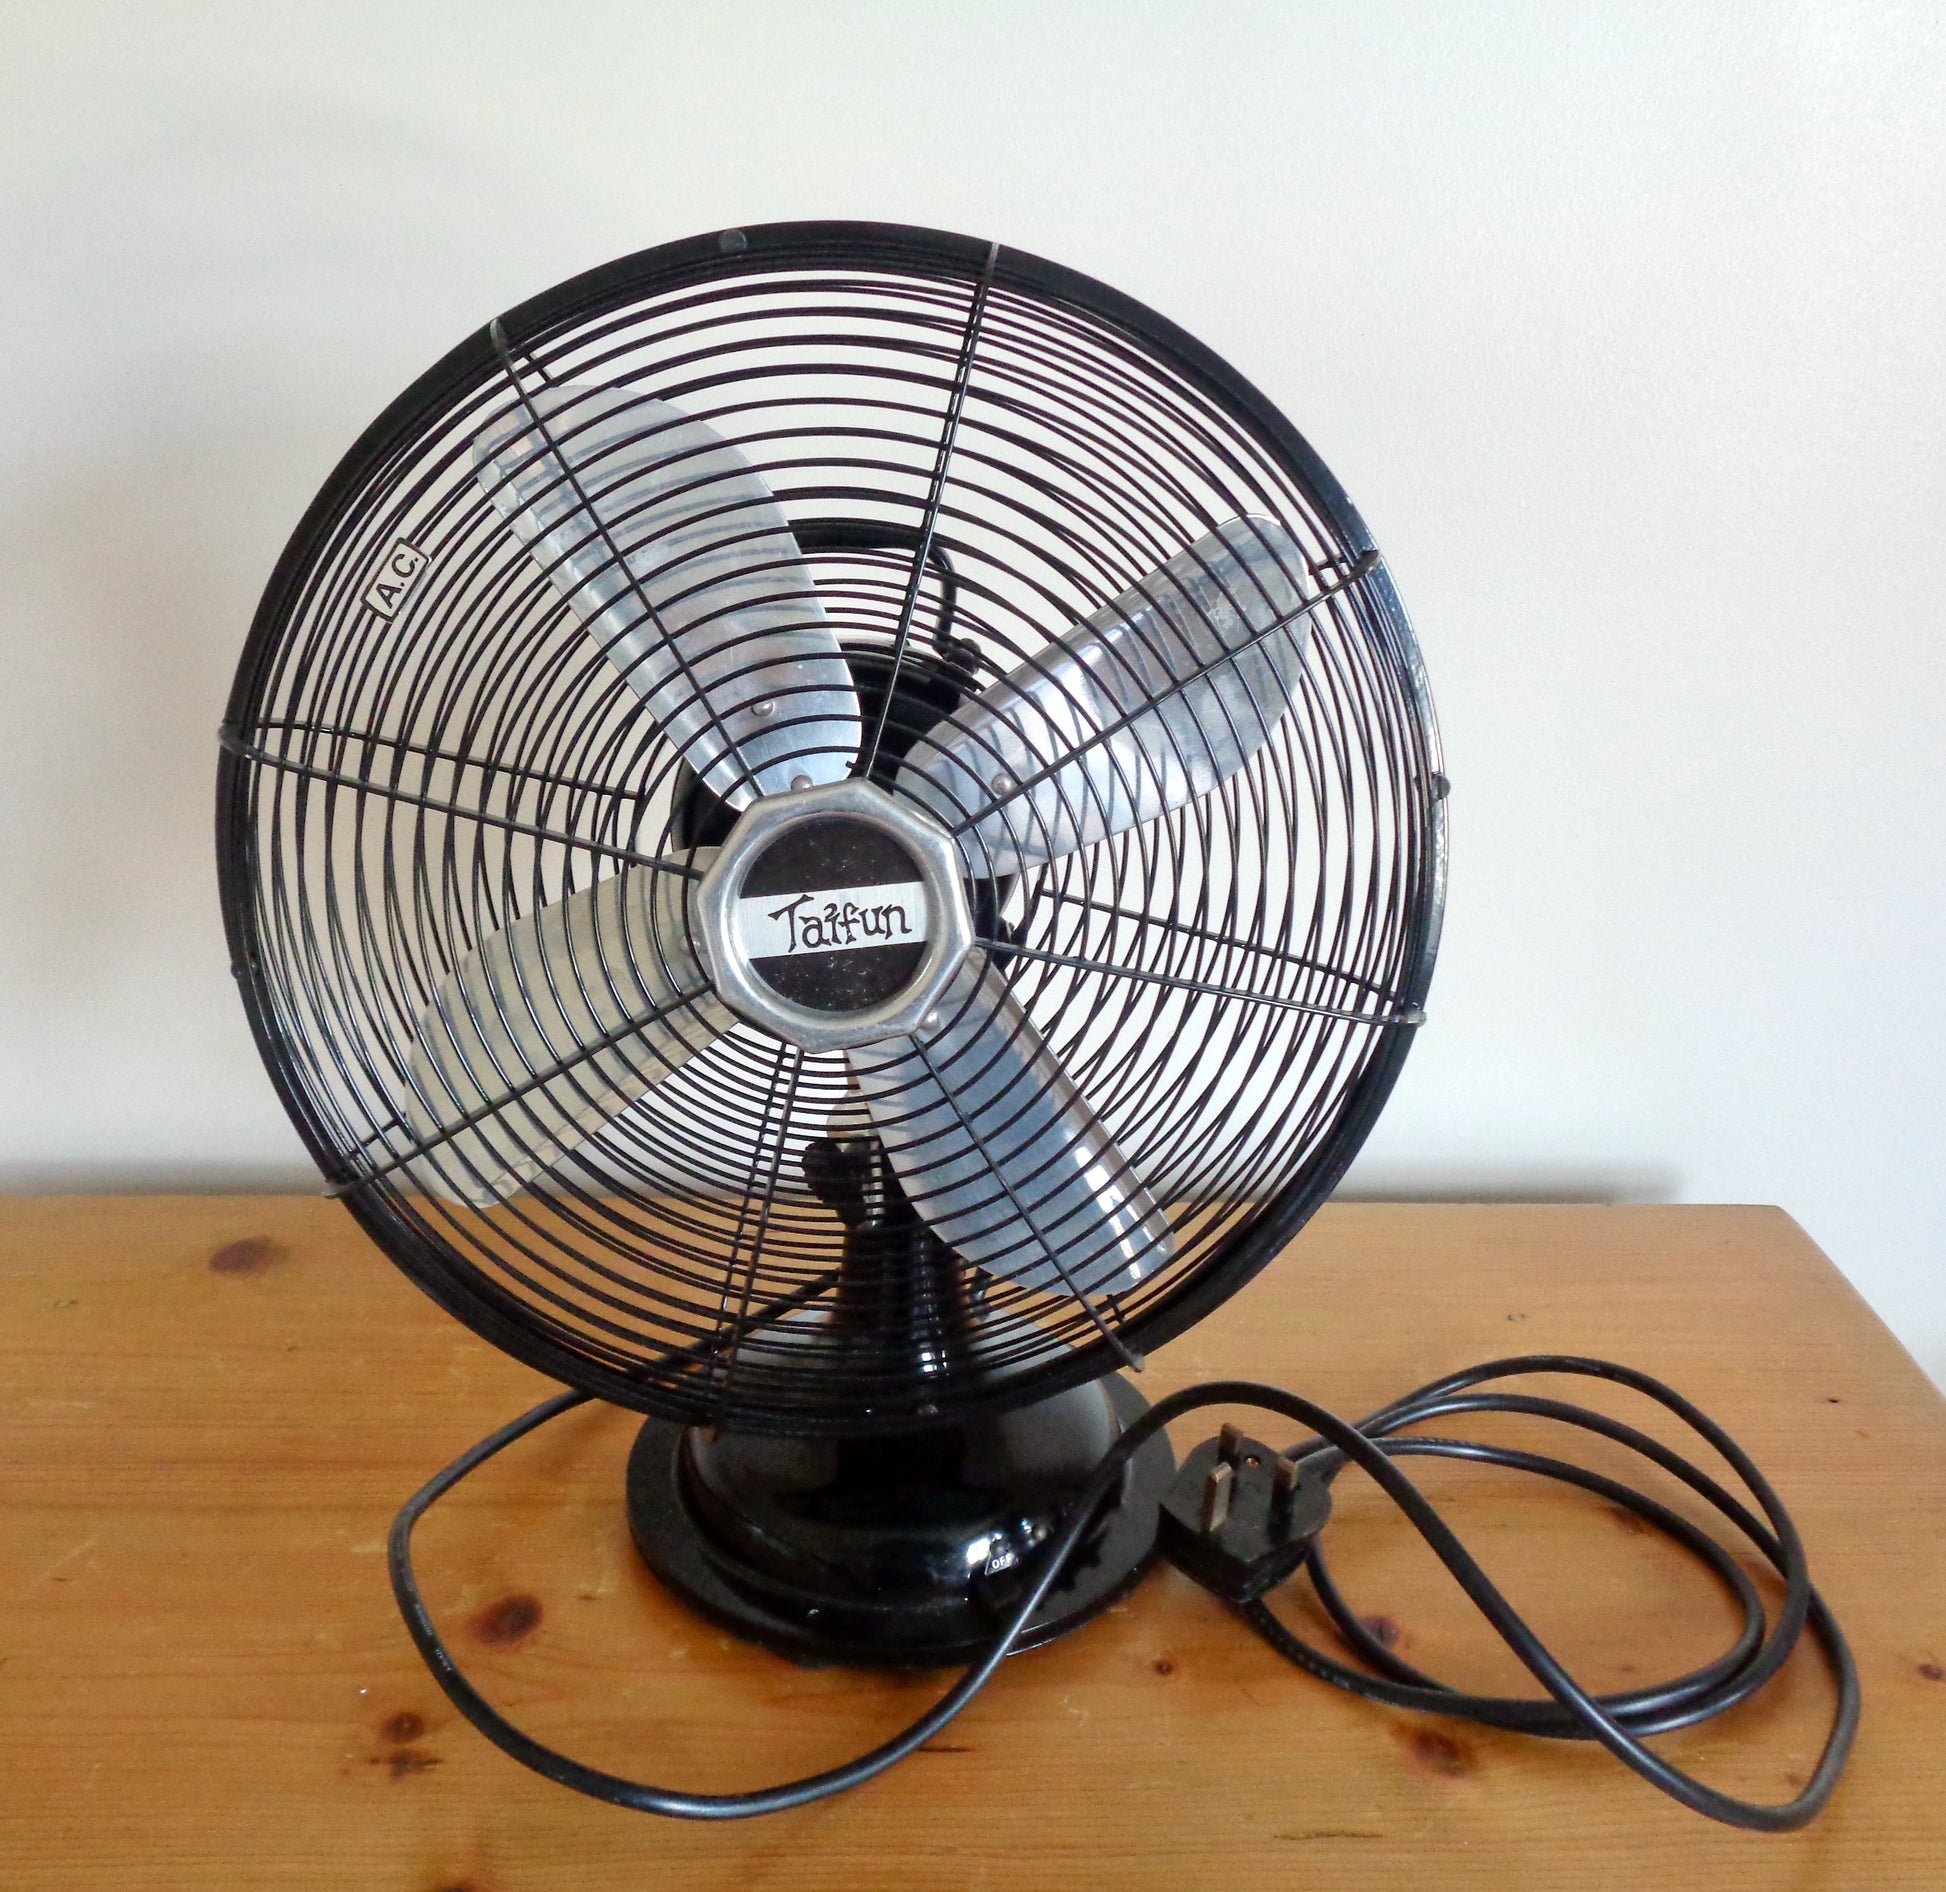 Retro 12 inch Ikea Taifun Desk Fan With Chrome Blades And Black Metal Antiques and Collectibles